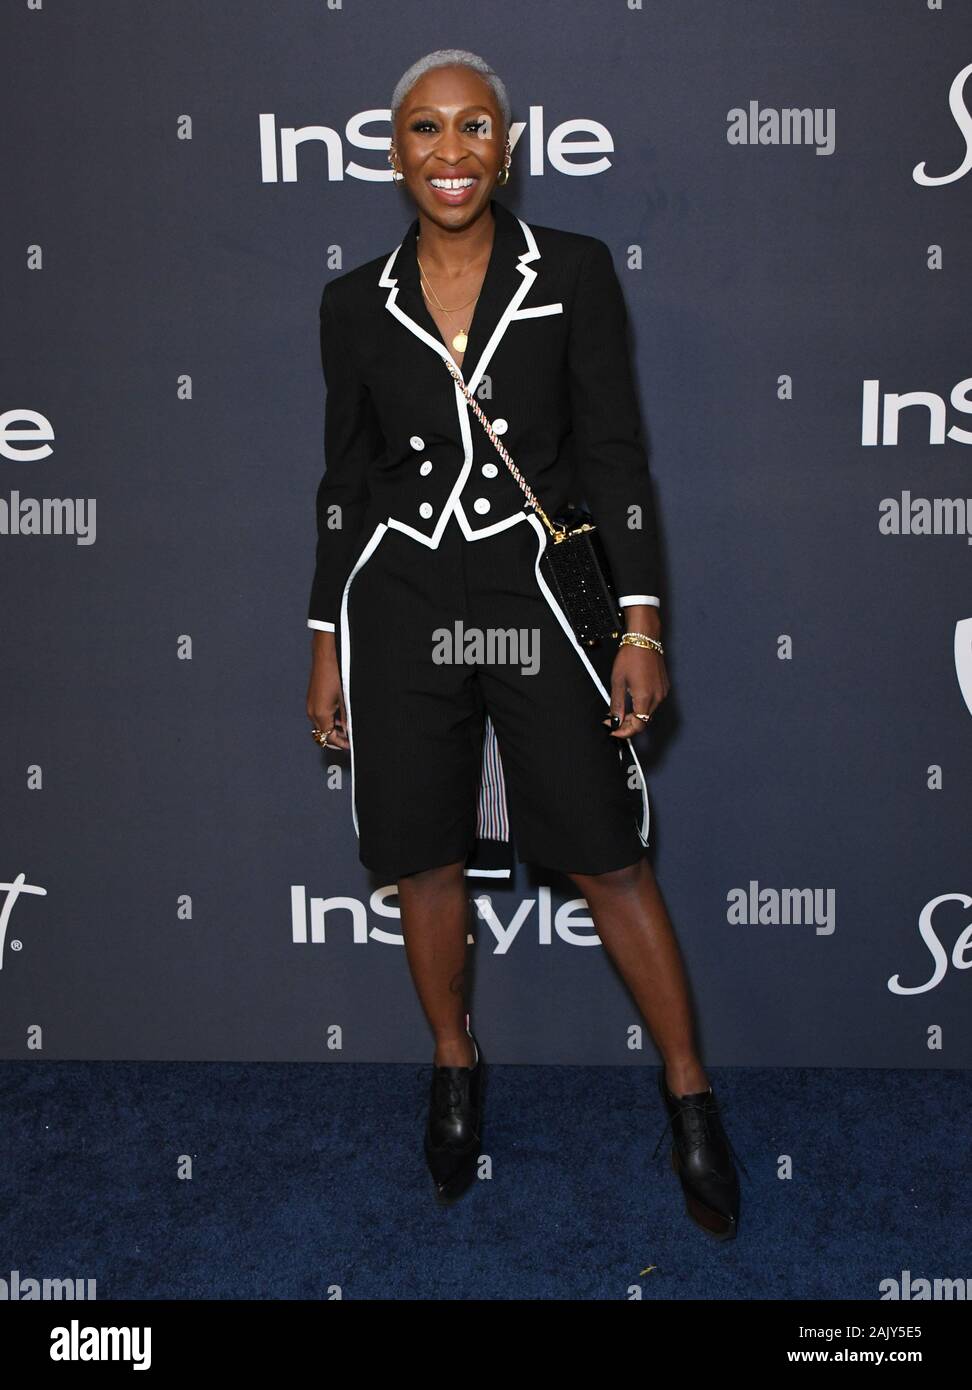 Beverly Hills, California, USA. 05 January 2020 - Beverly Hills, California - Cynthia Erivo. 21st Annual InStyle and Warner Bros. Golden Globes After Party held at Beverly Hilton Hotel. Photo Credit: Birdie Thompson/AdMedia /MediaPunch Credit: MediaPunch Inc/Alamy Live News Stock Photo